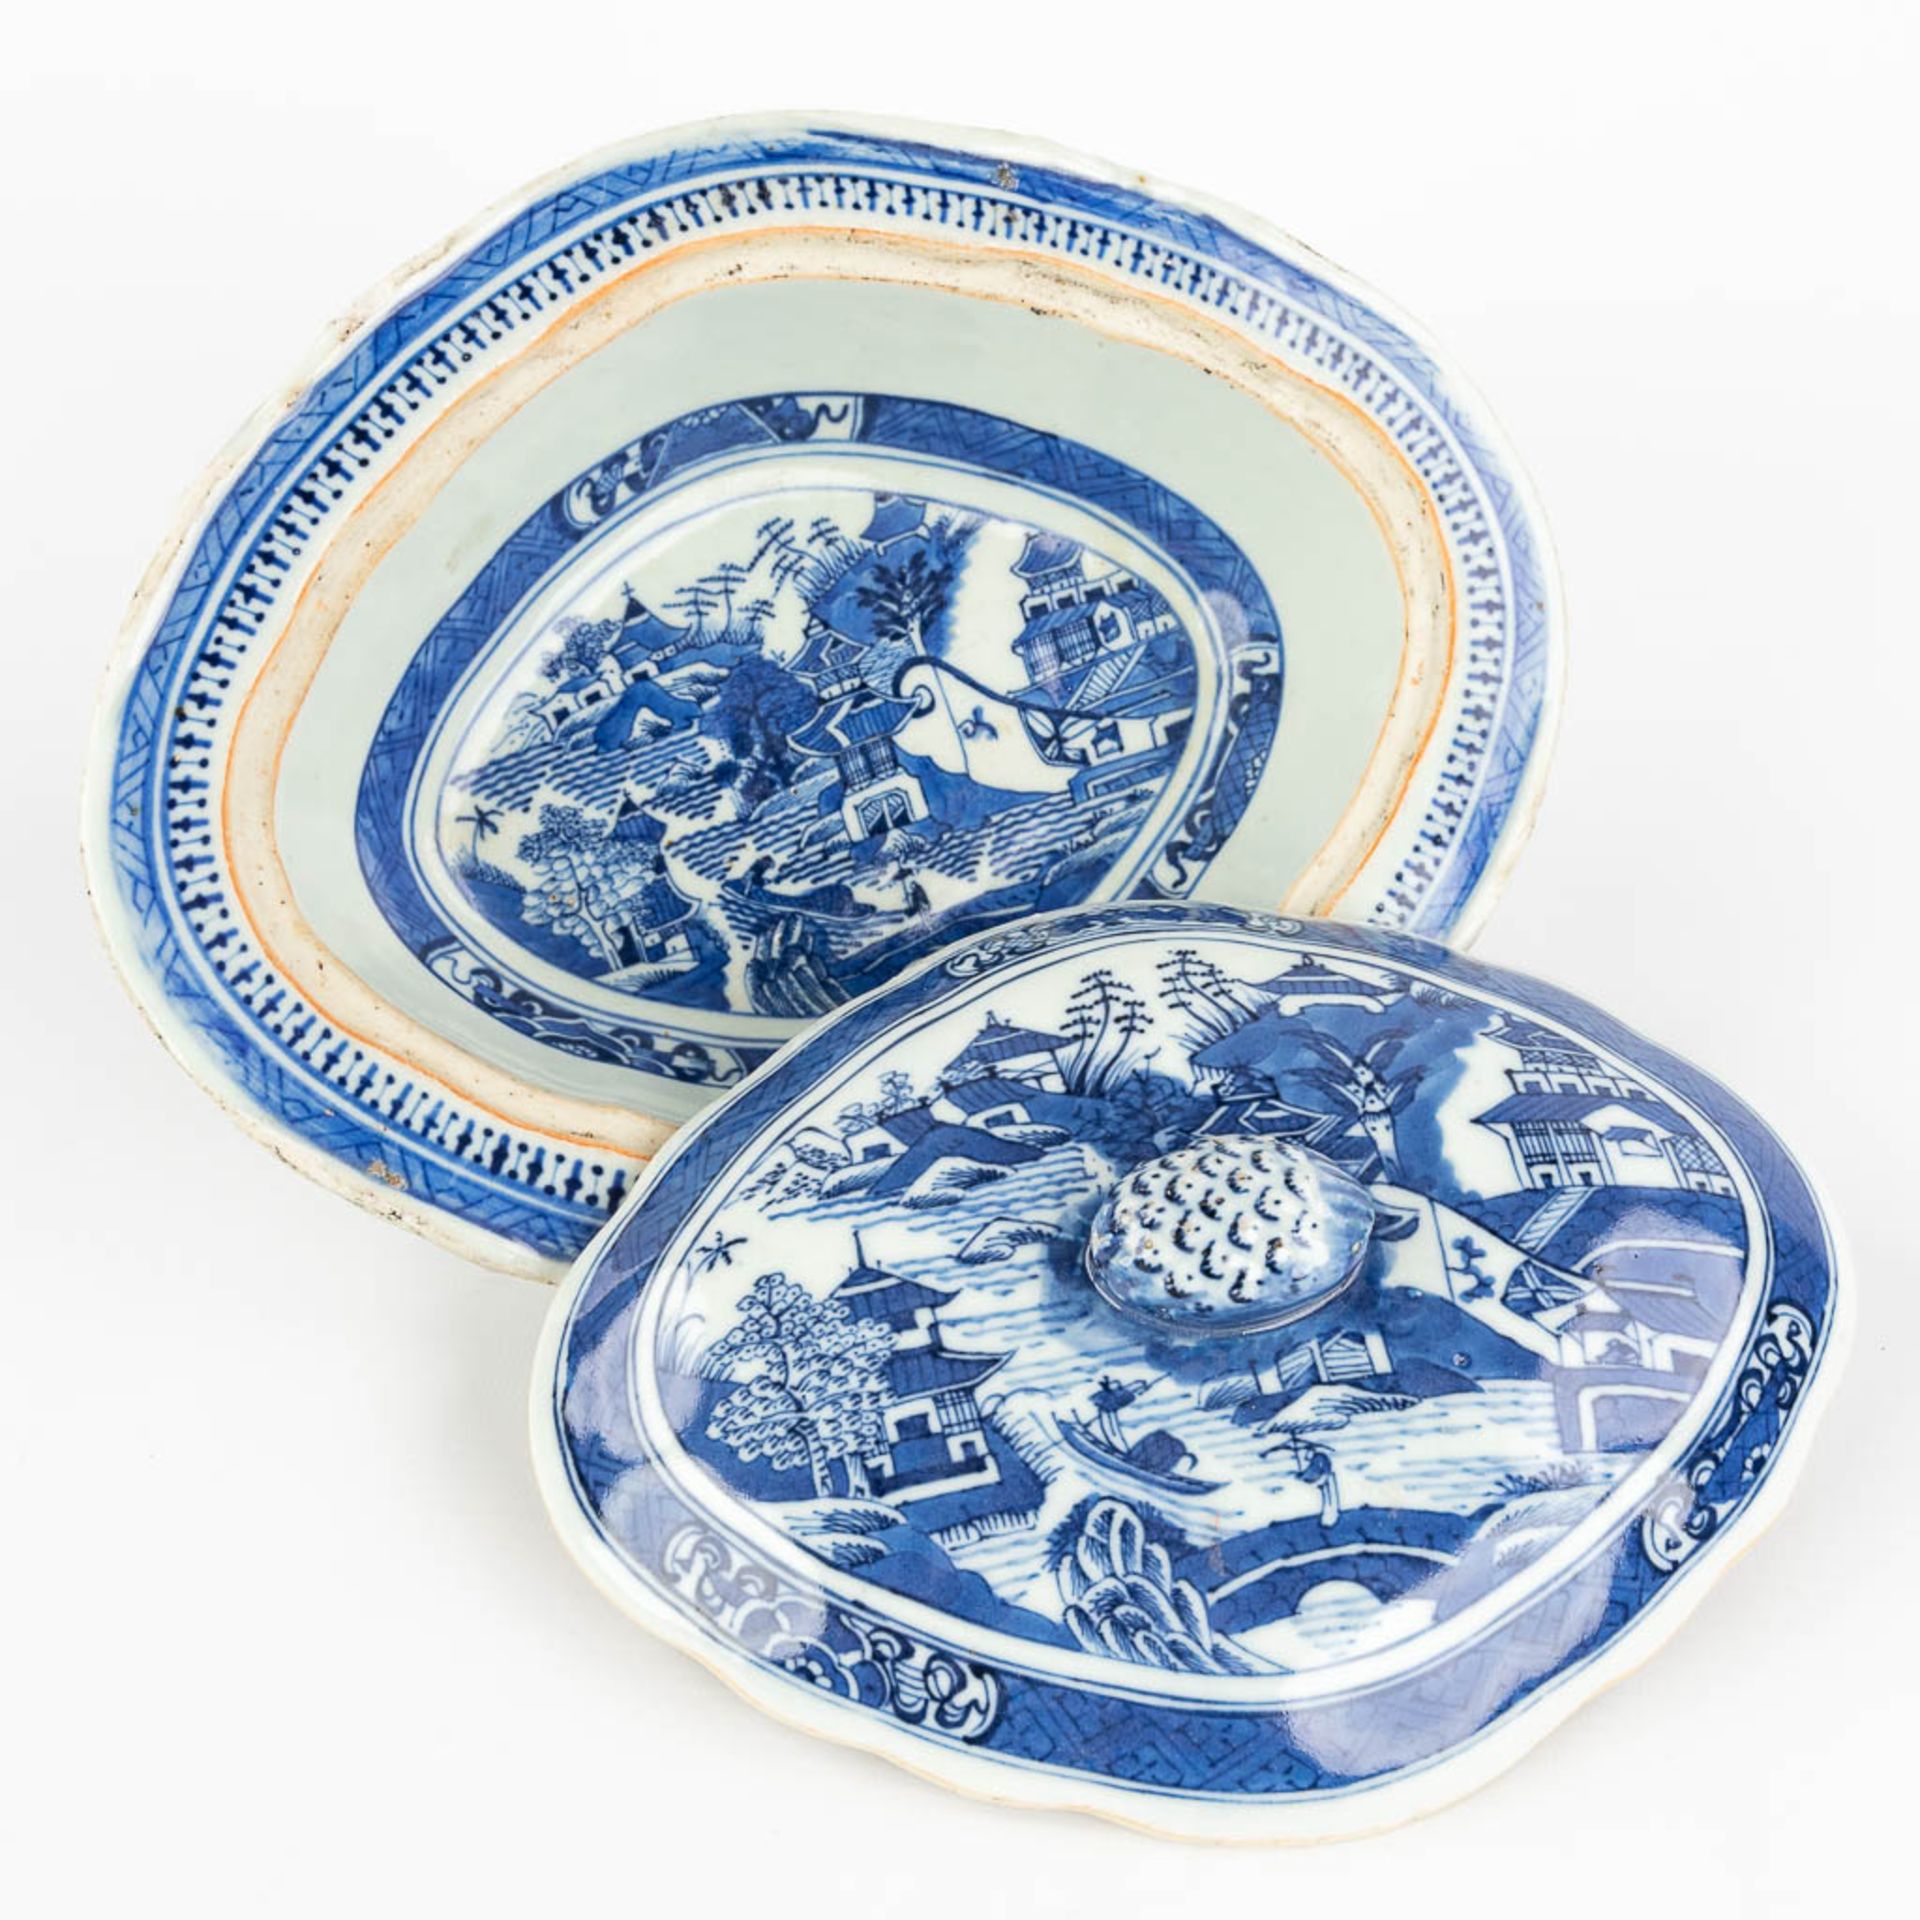 A Chinese bowl with a lid and blue-white landscape decor. 19th C. (L: 21,5 x W: 26,5 x H: 10 cm) - Image 15 of 15